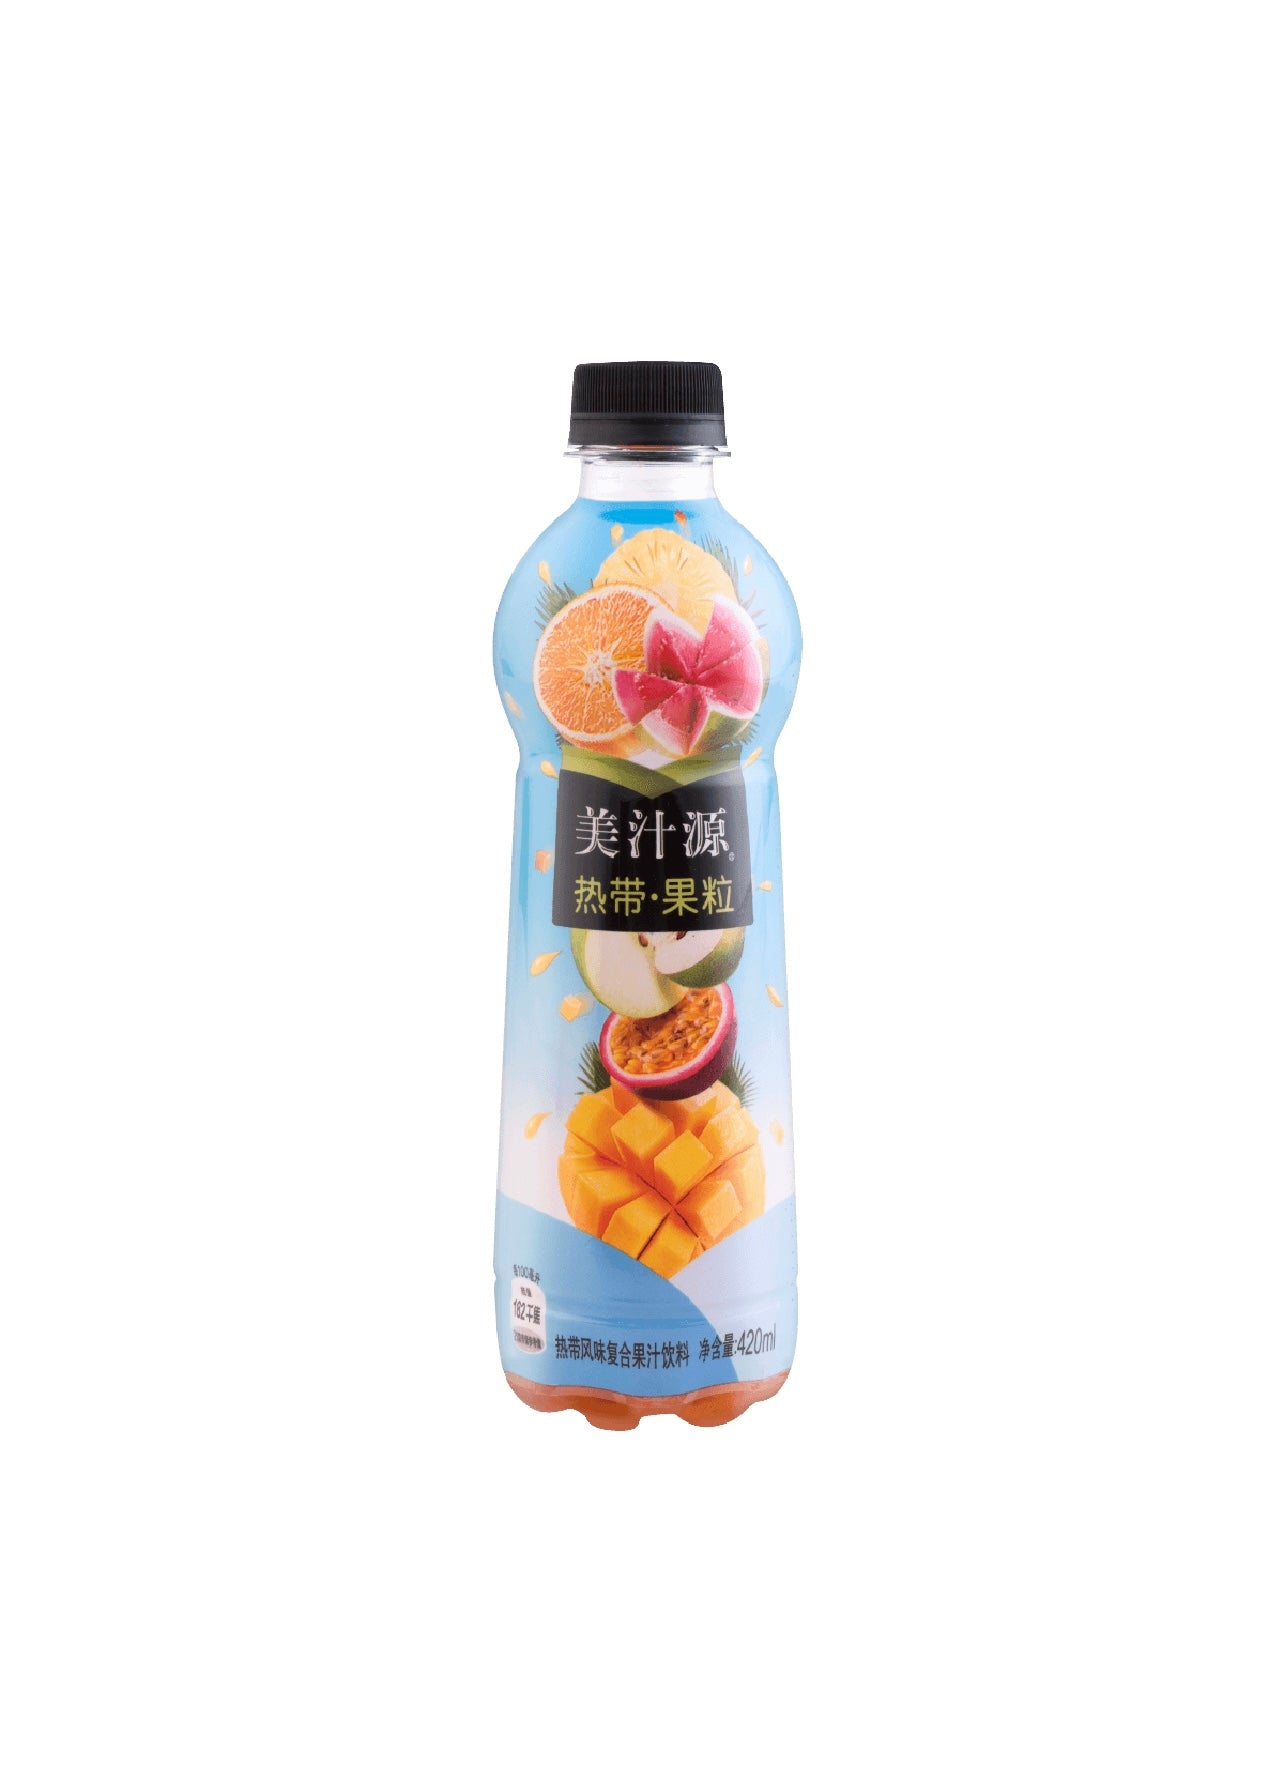 MINUTE MAID Tropical Flavor Drink 420ml - China